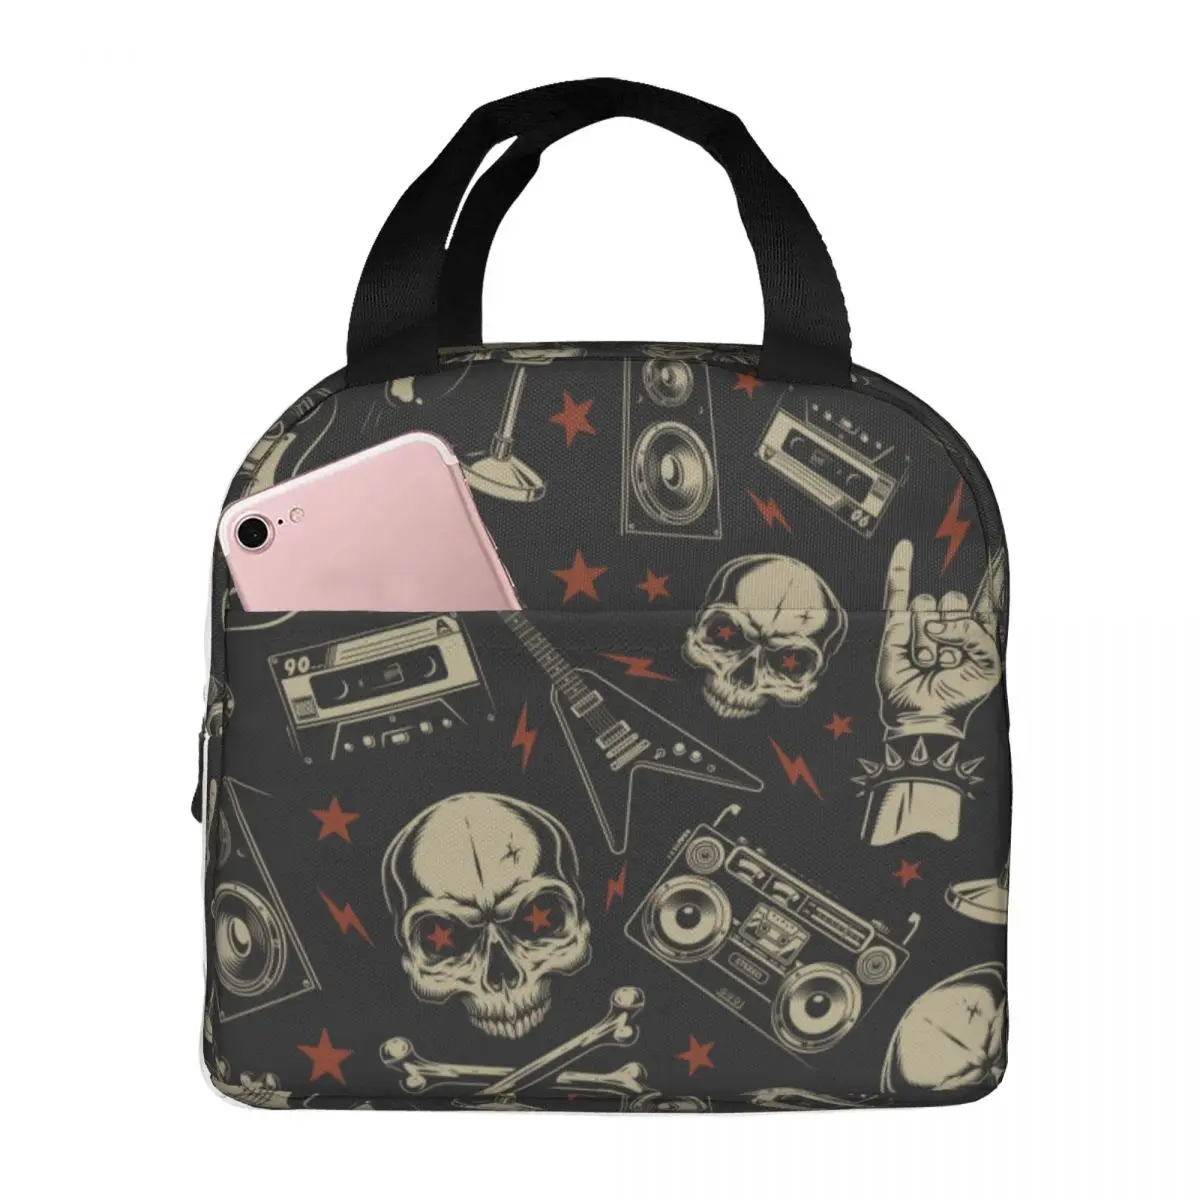 Heavy Metal Skull Lunch Bags Portable Insulated Oxford Cooler Bag Thermal Cold Food Picnic Lunch Box for Women Children